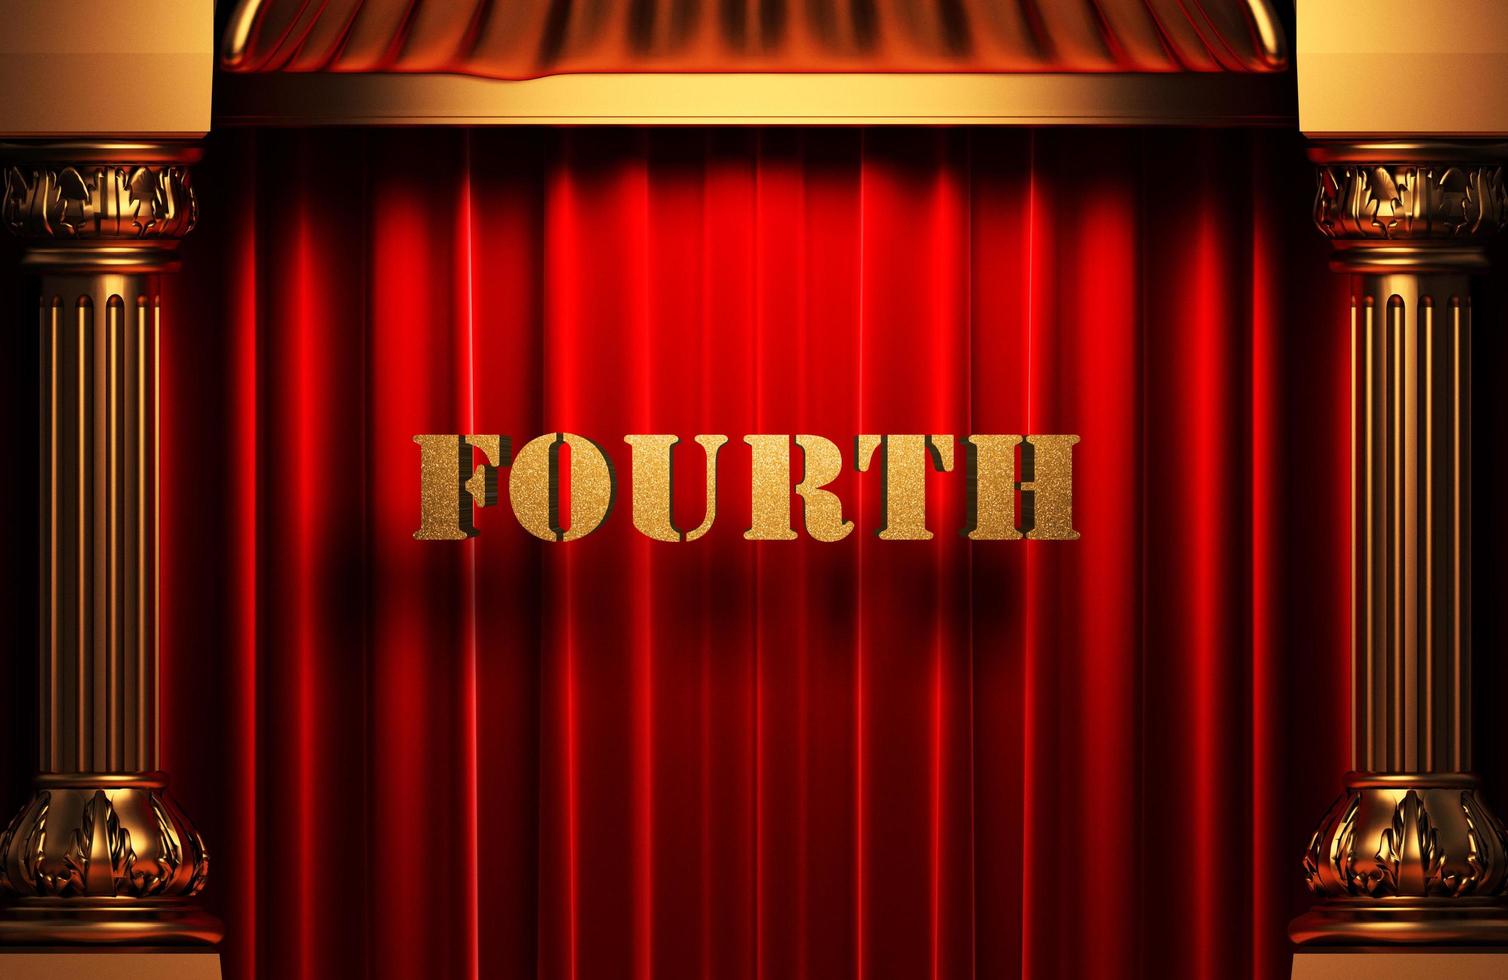 fourth golden word on red curtain photo